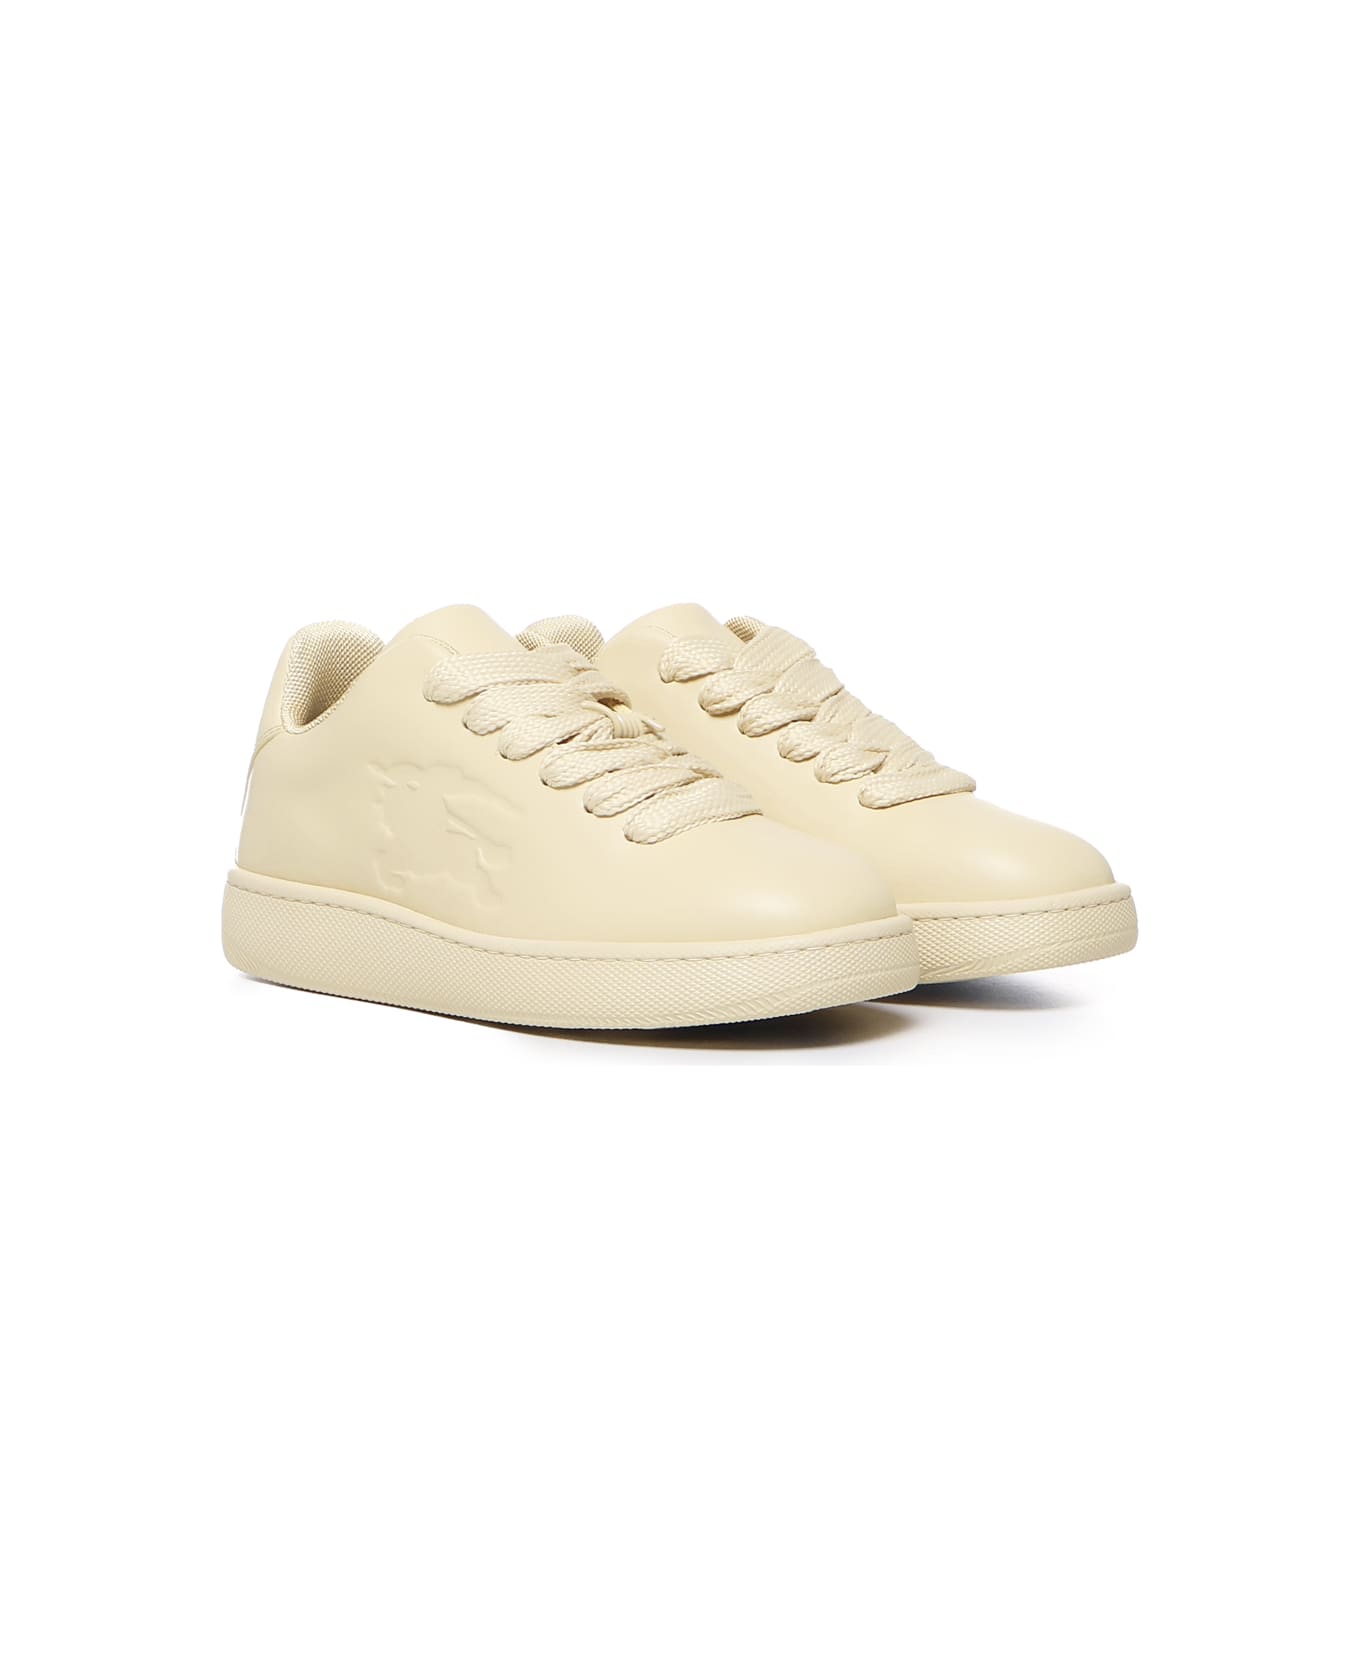 Burberry Box Sneaker In Leather - Yellow スニーカー